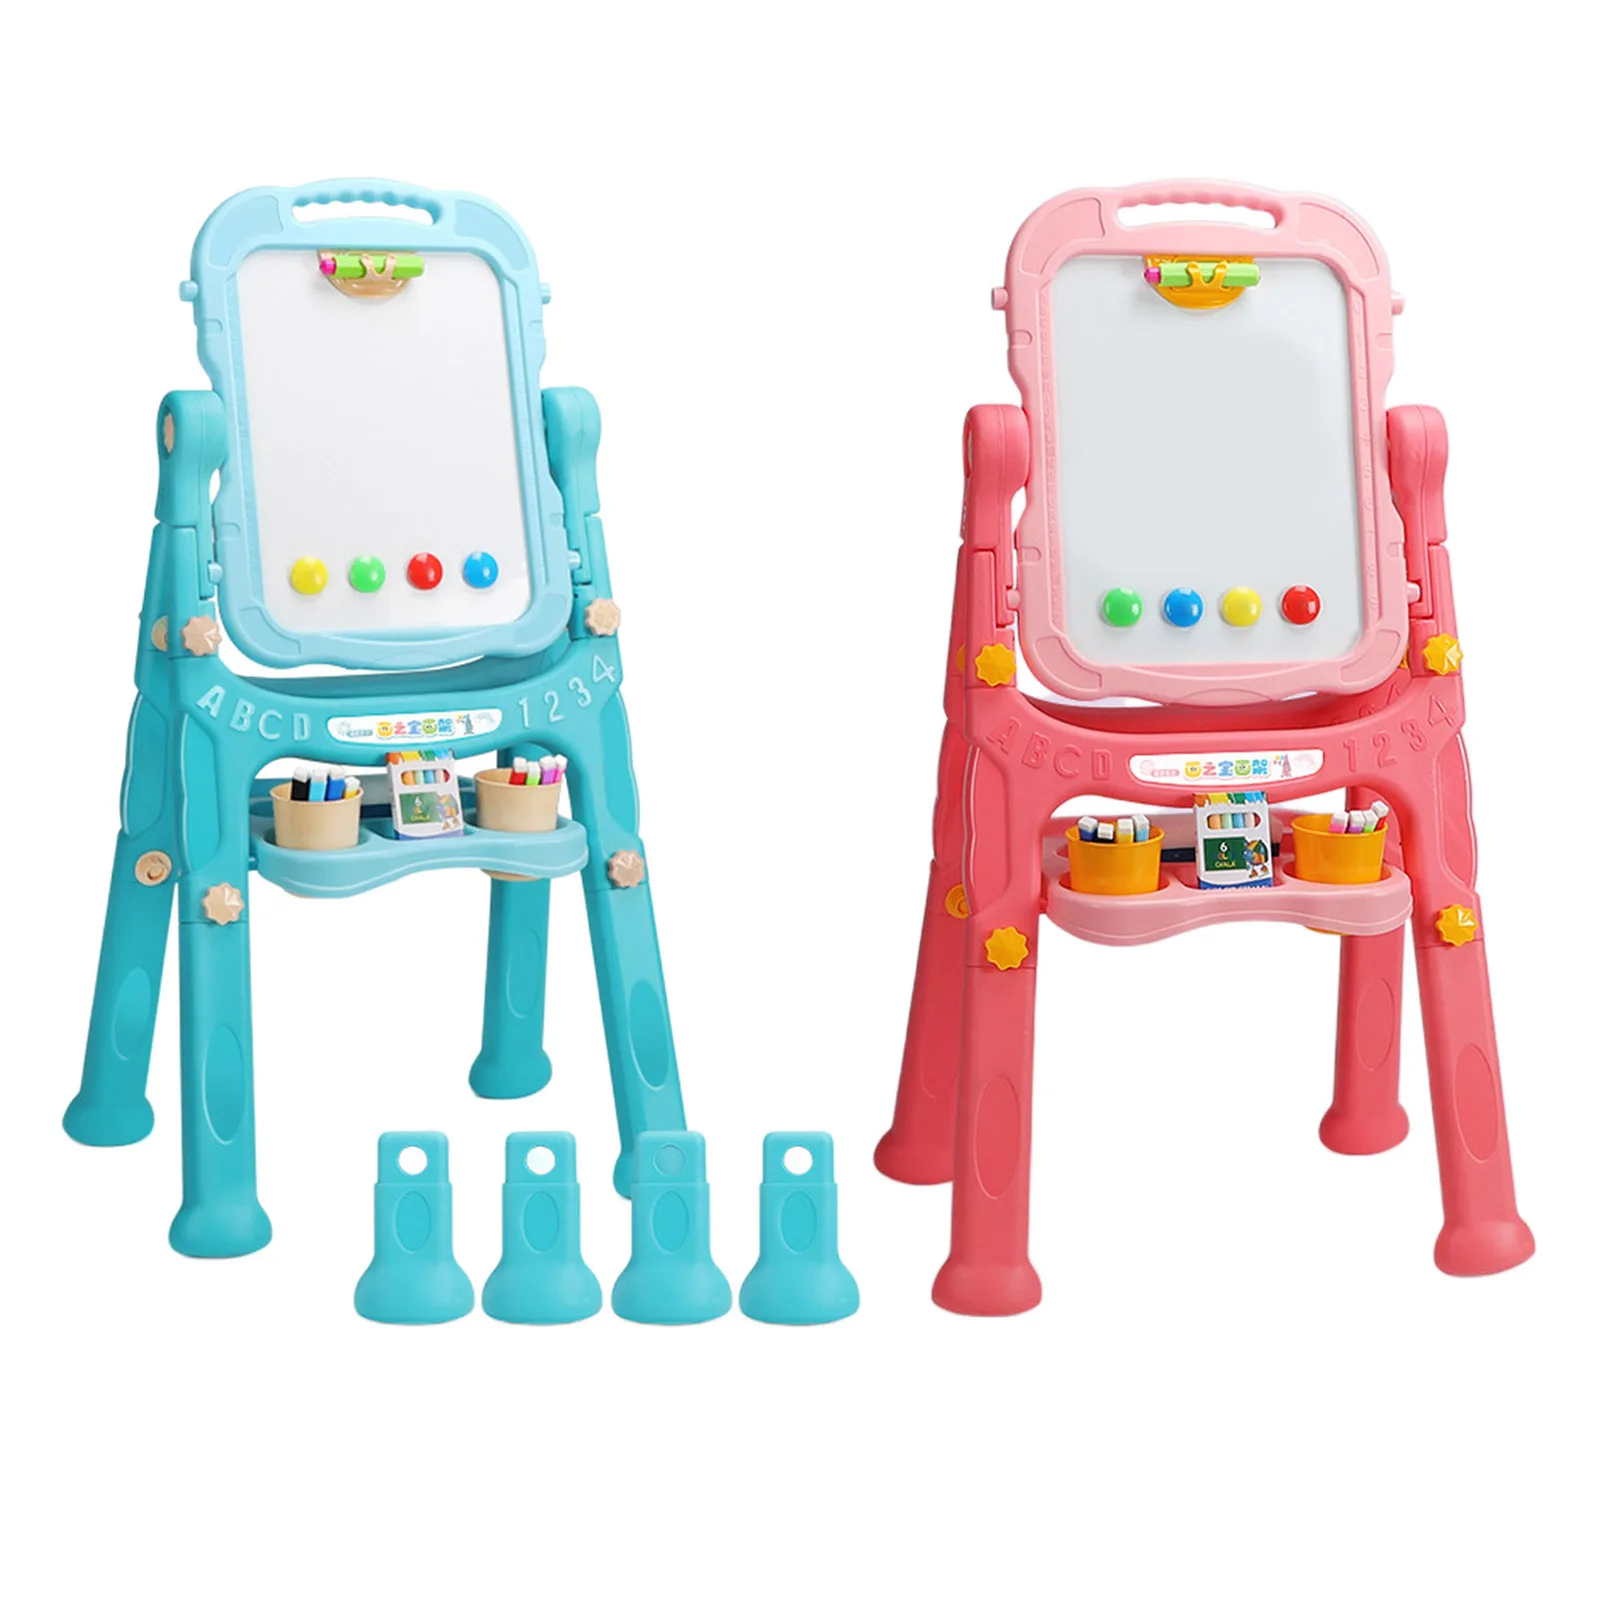 2 in 1 Art Easel for Kids Drawing Board Easel Drawing Chalkboard /Dry Erase Board Toys for Girls Boys Writing Pad